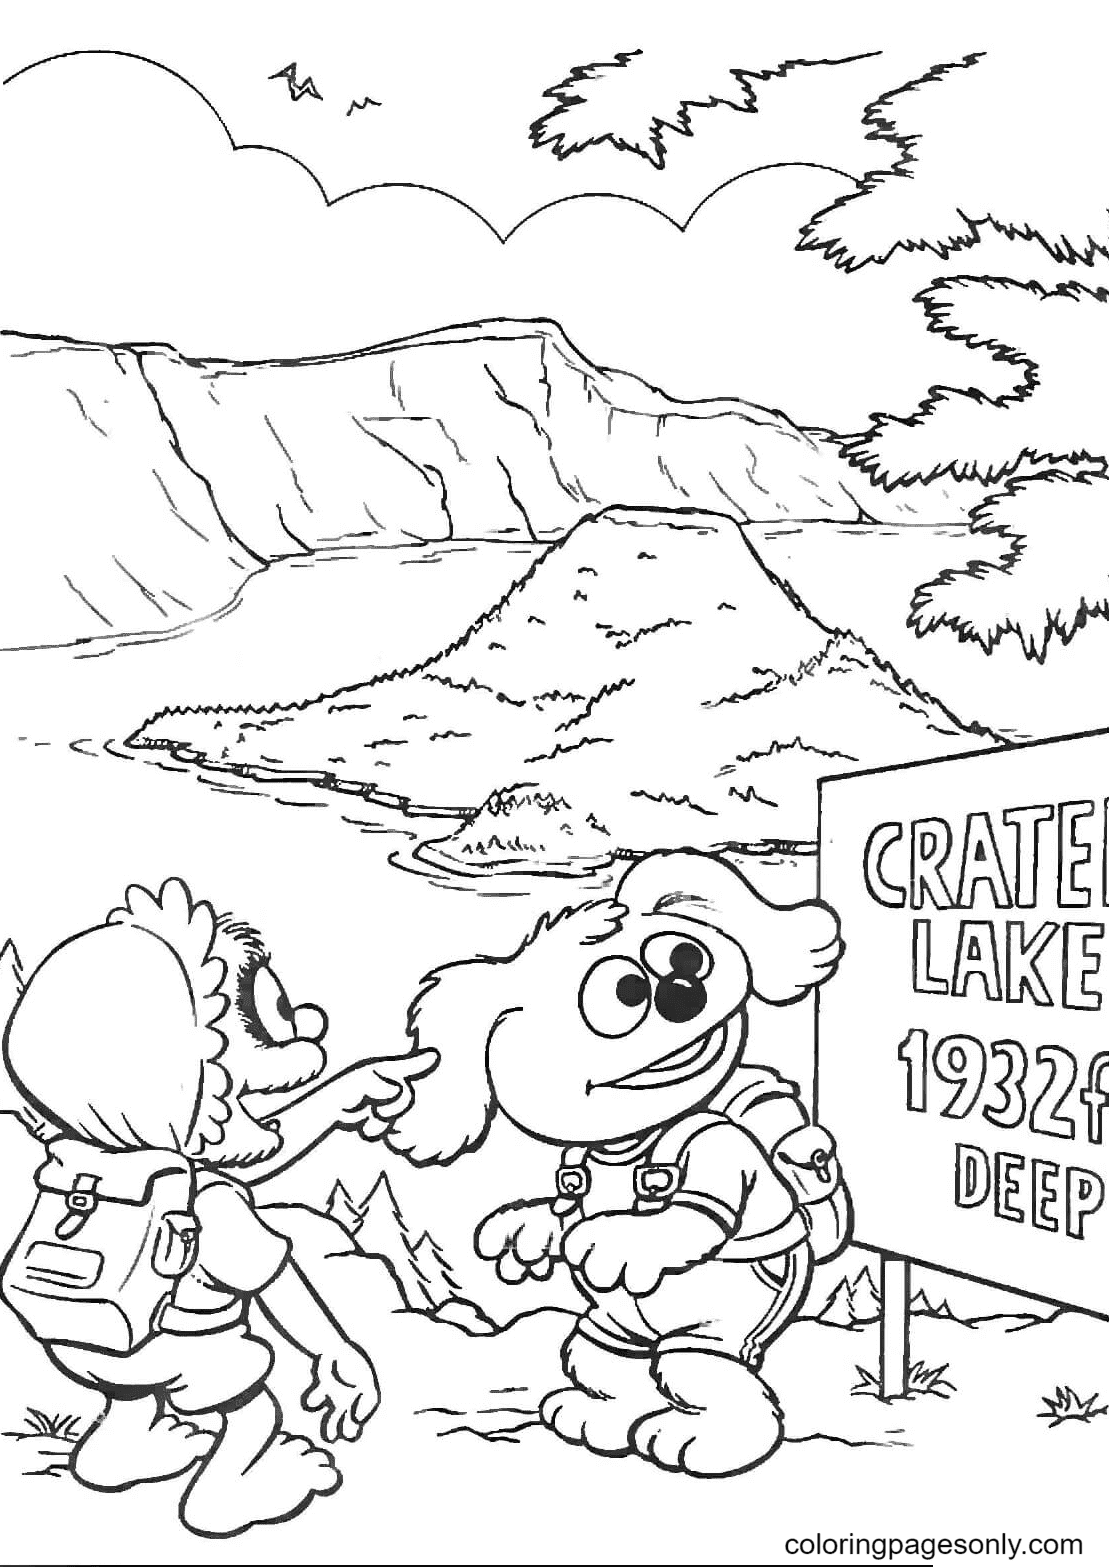 Animal and Rowlf on a Crater lake Coloring Pages